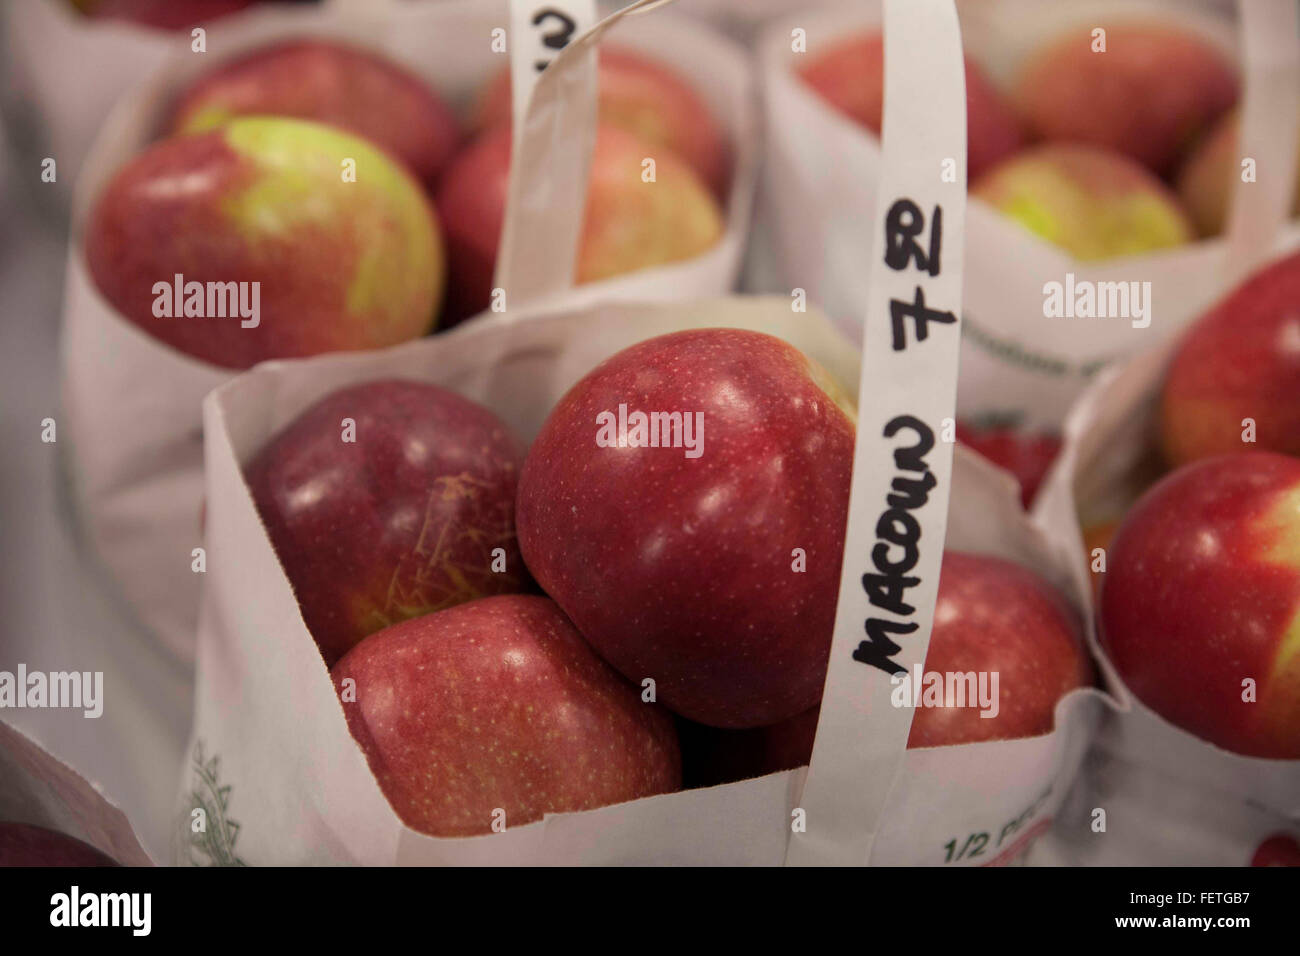 Apples for sale at an indoor market in Williamstown, Massachusetts Stock Photo